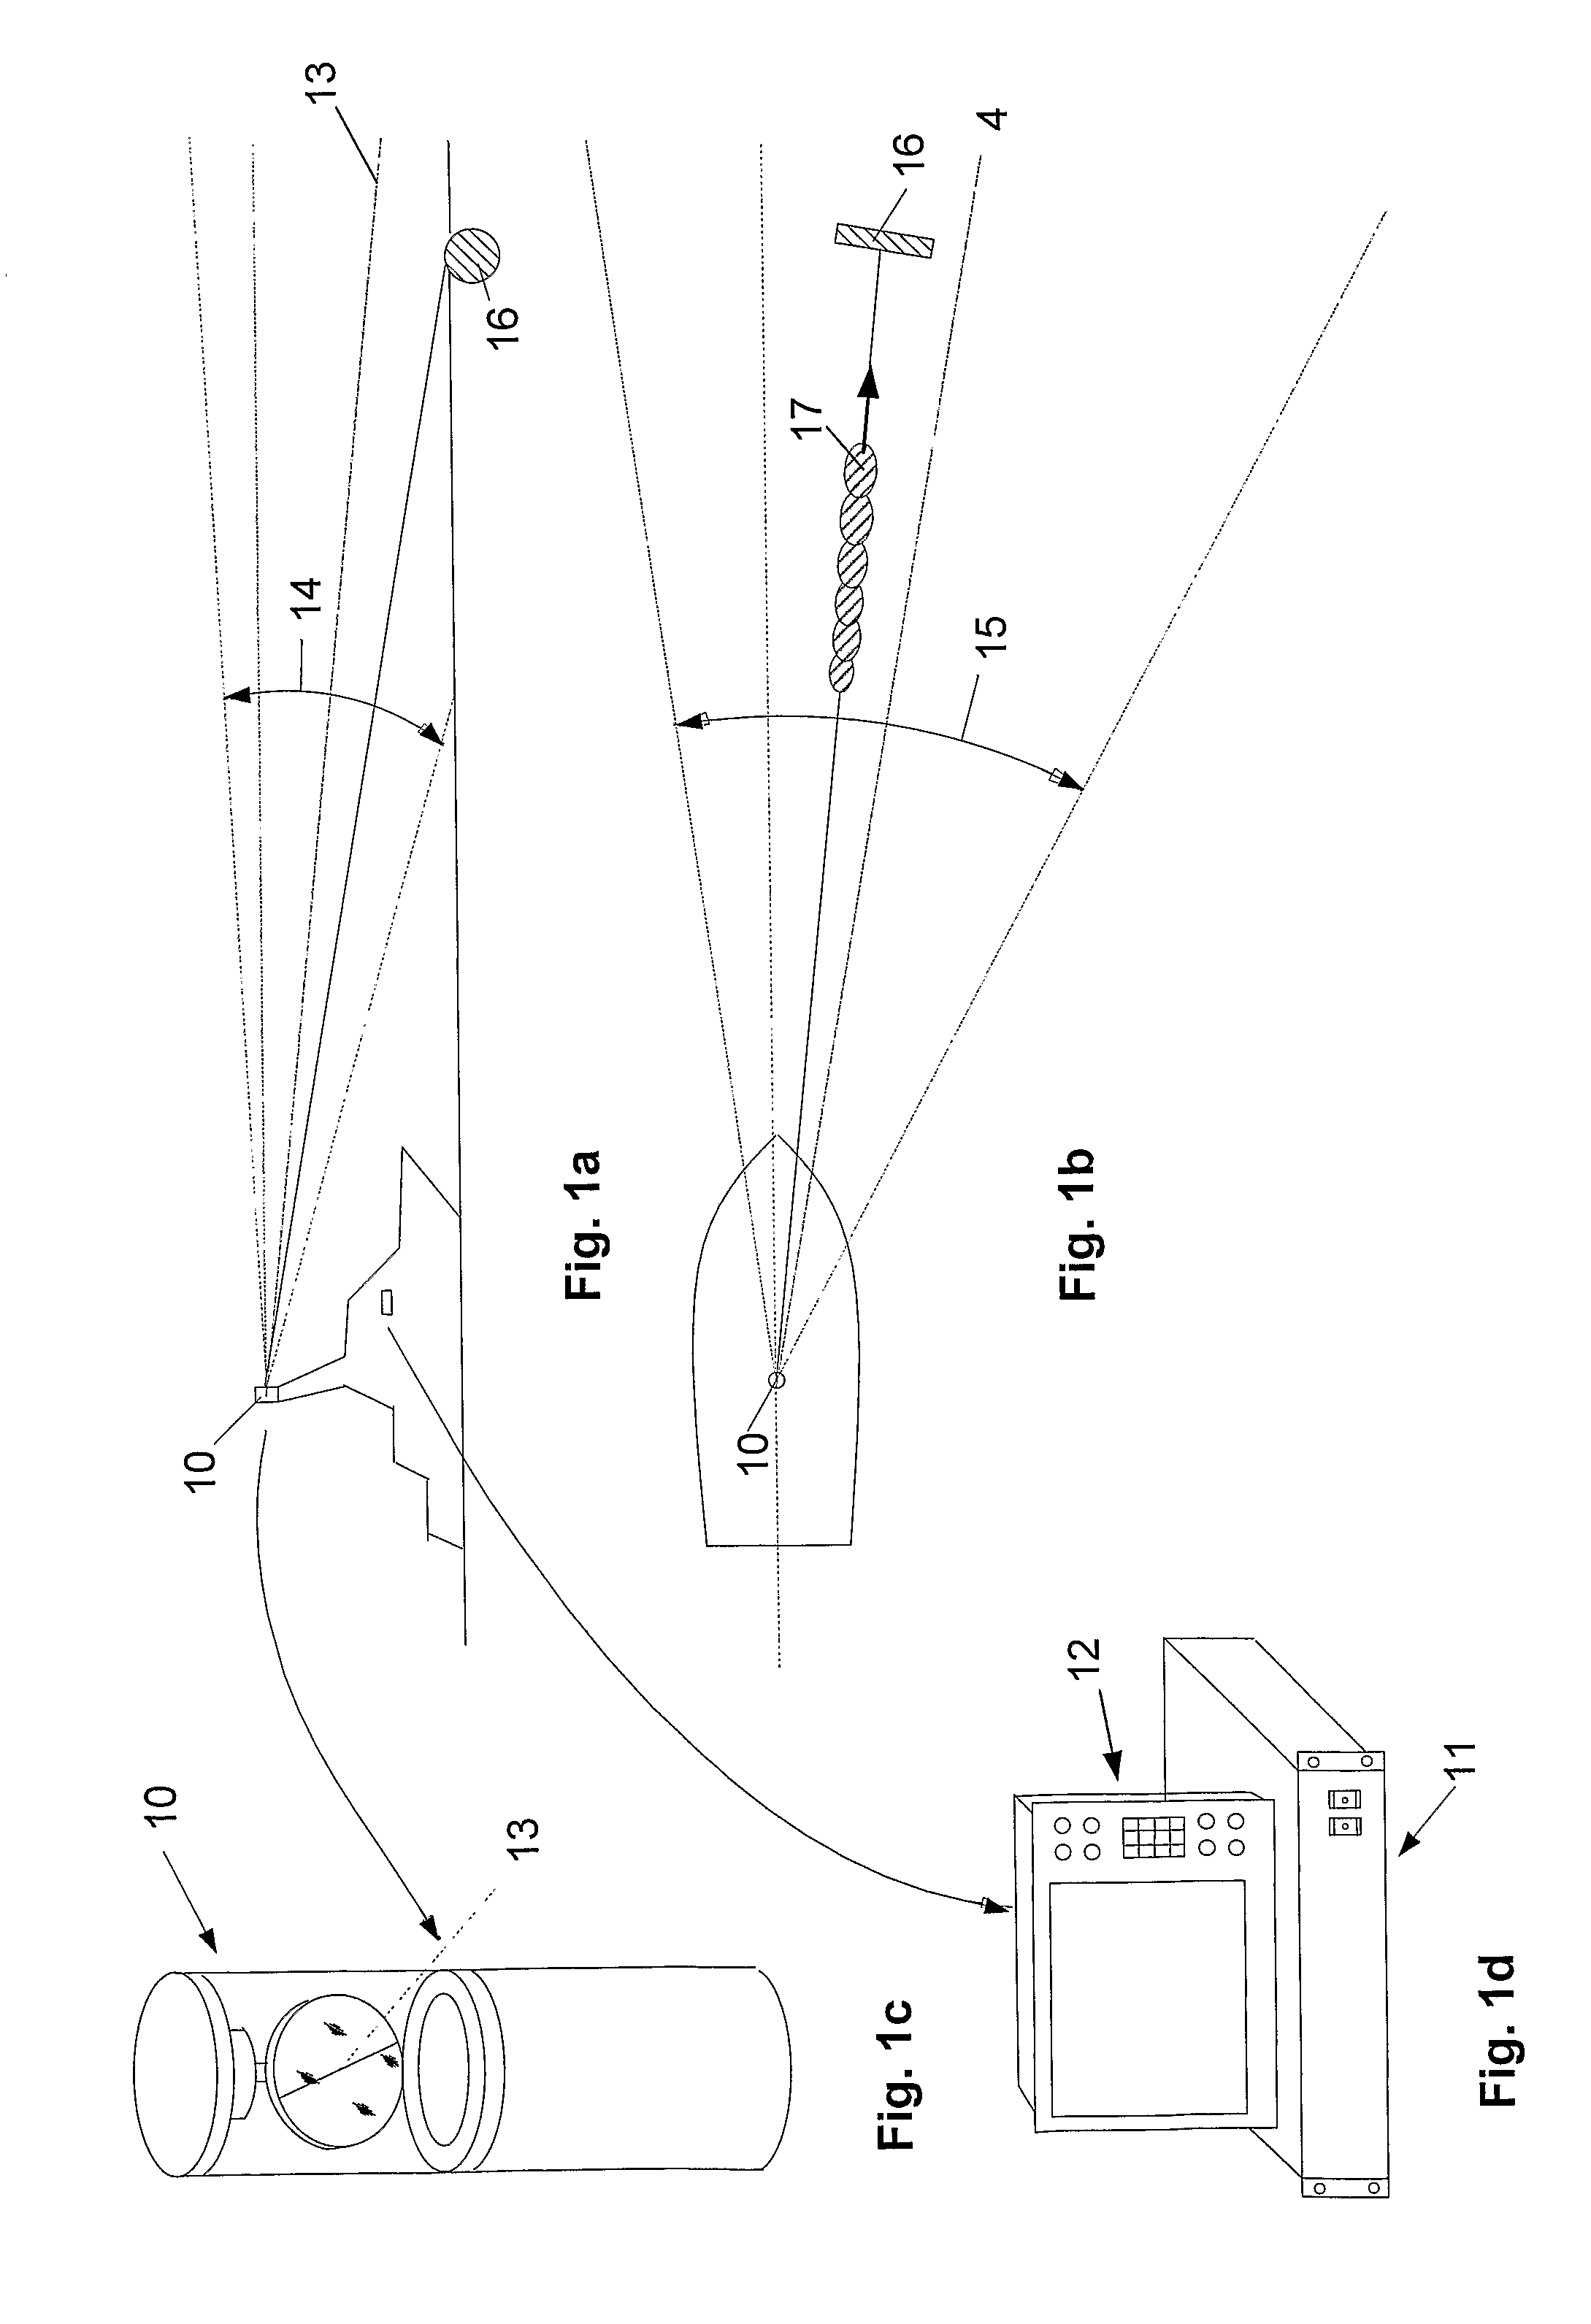 System for the detection and the depiction of objects in the path of marine vessels